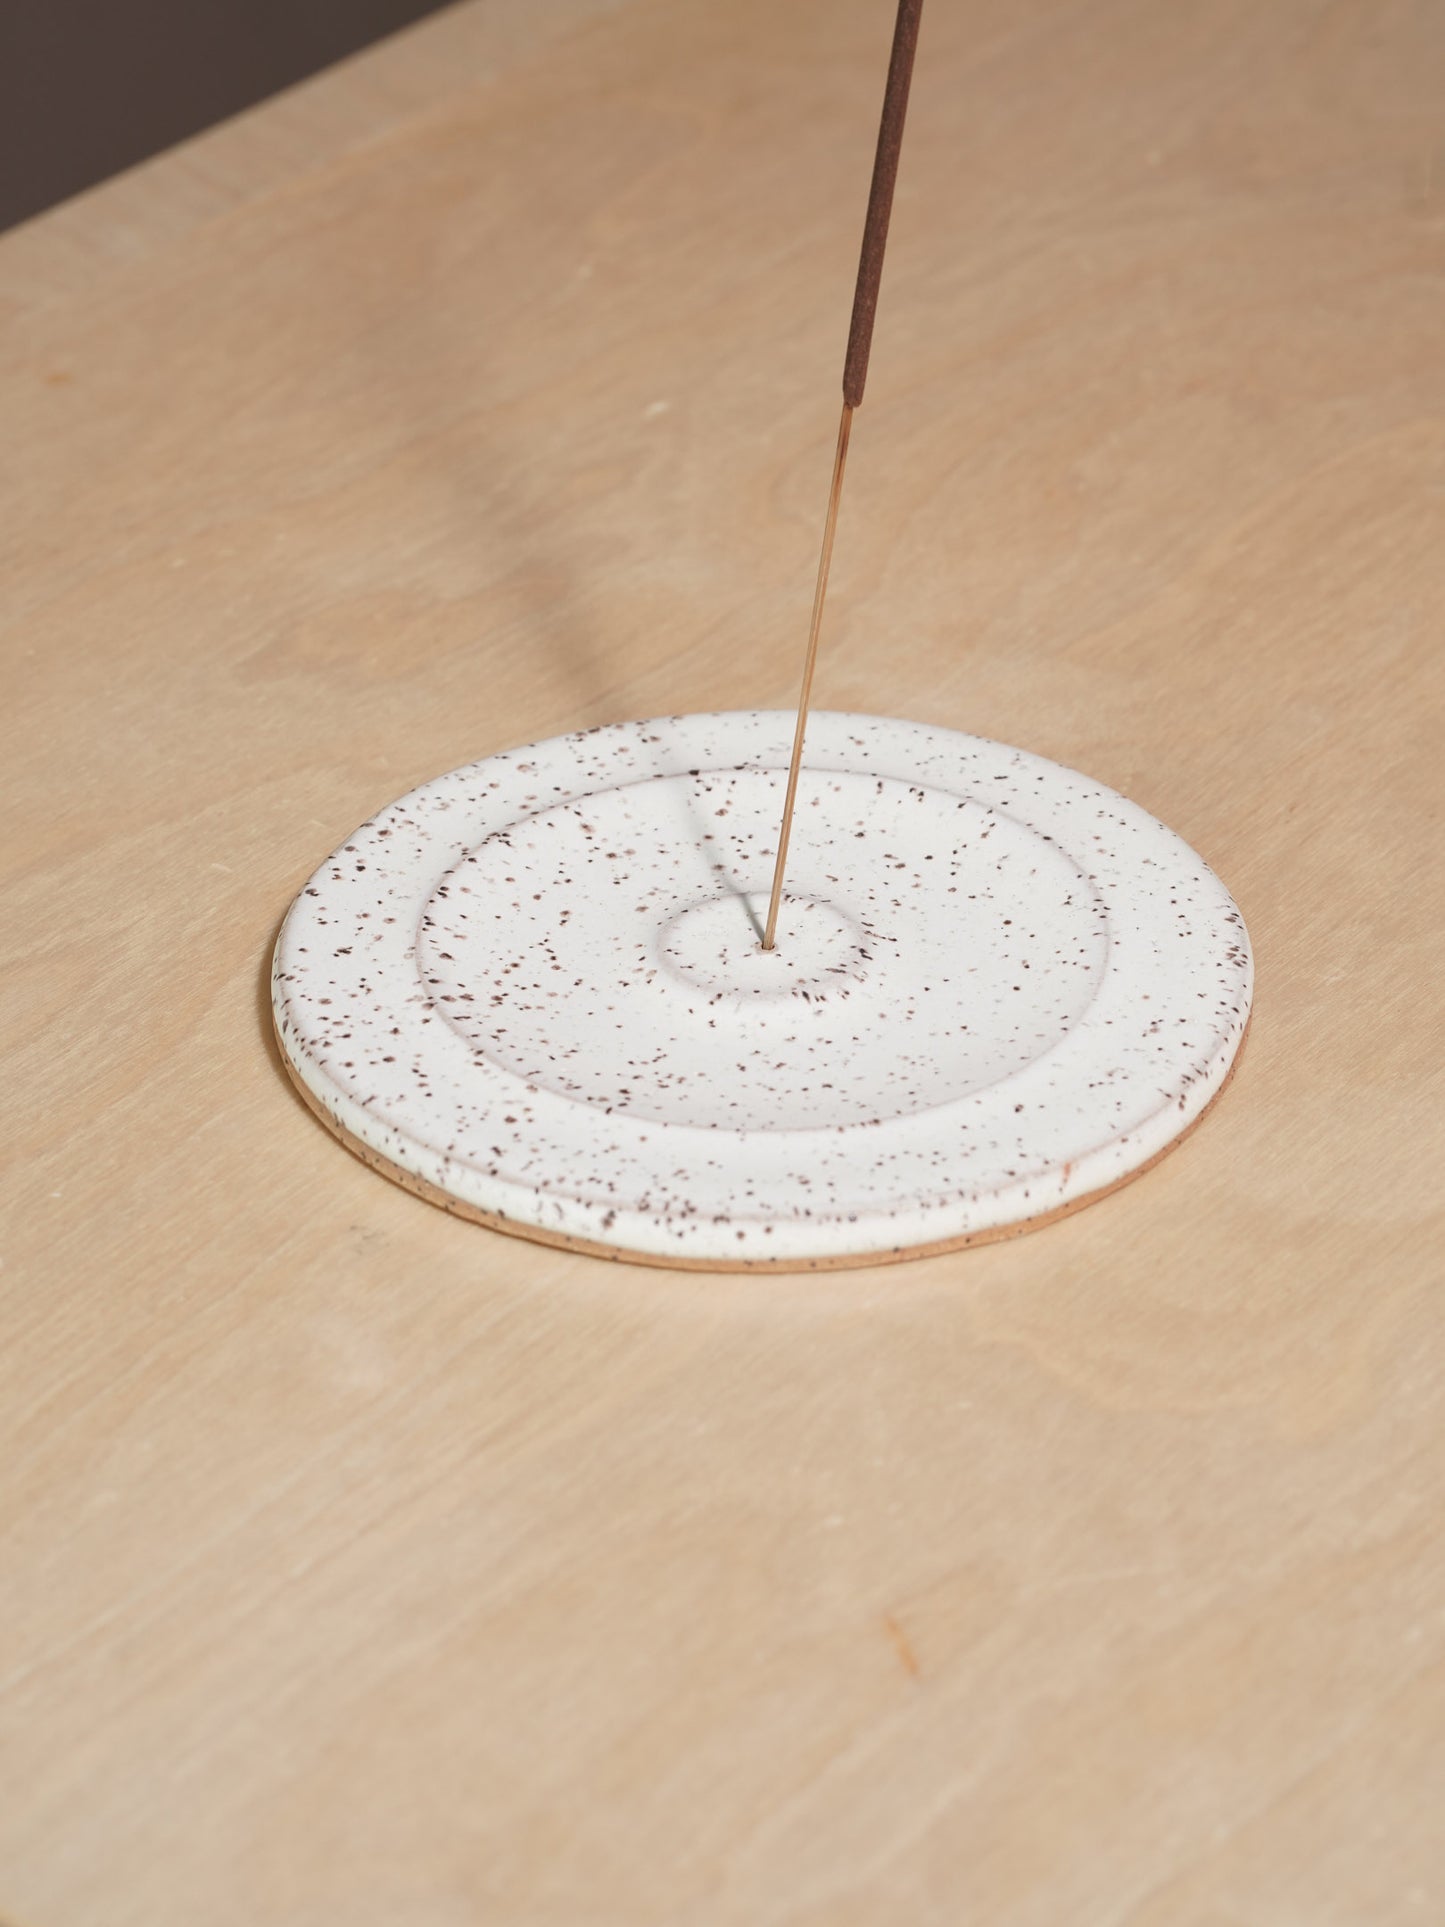 Kendall Davis Clay x Gifted Speckled Incense Holder